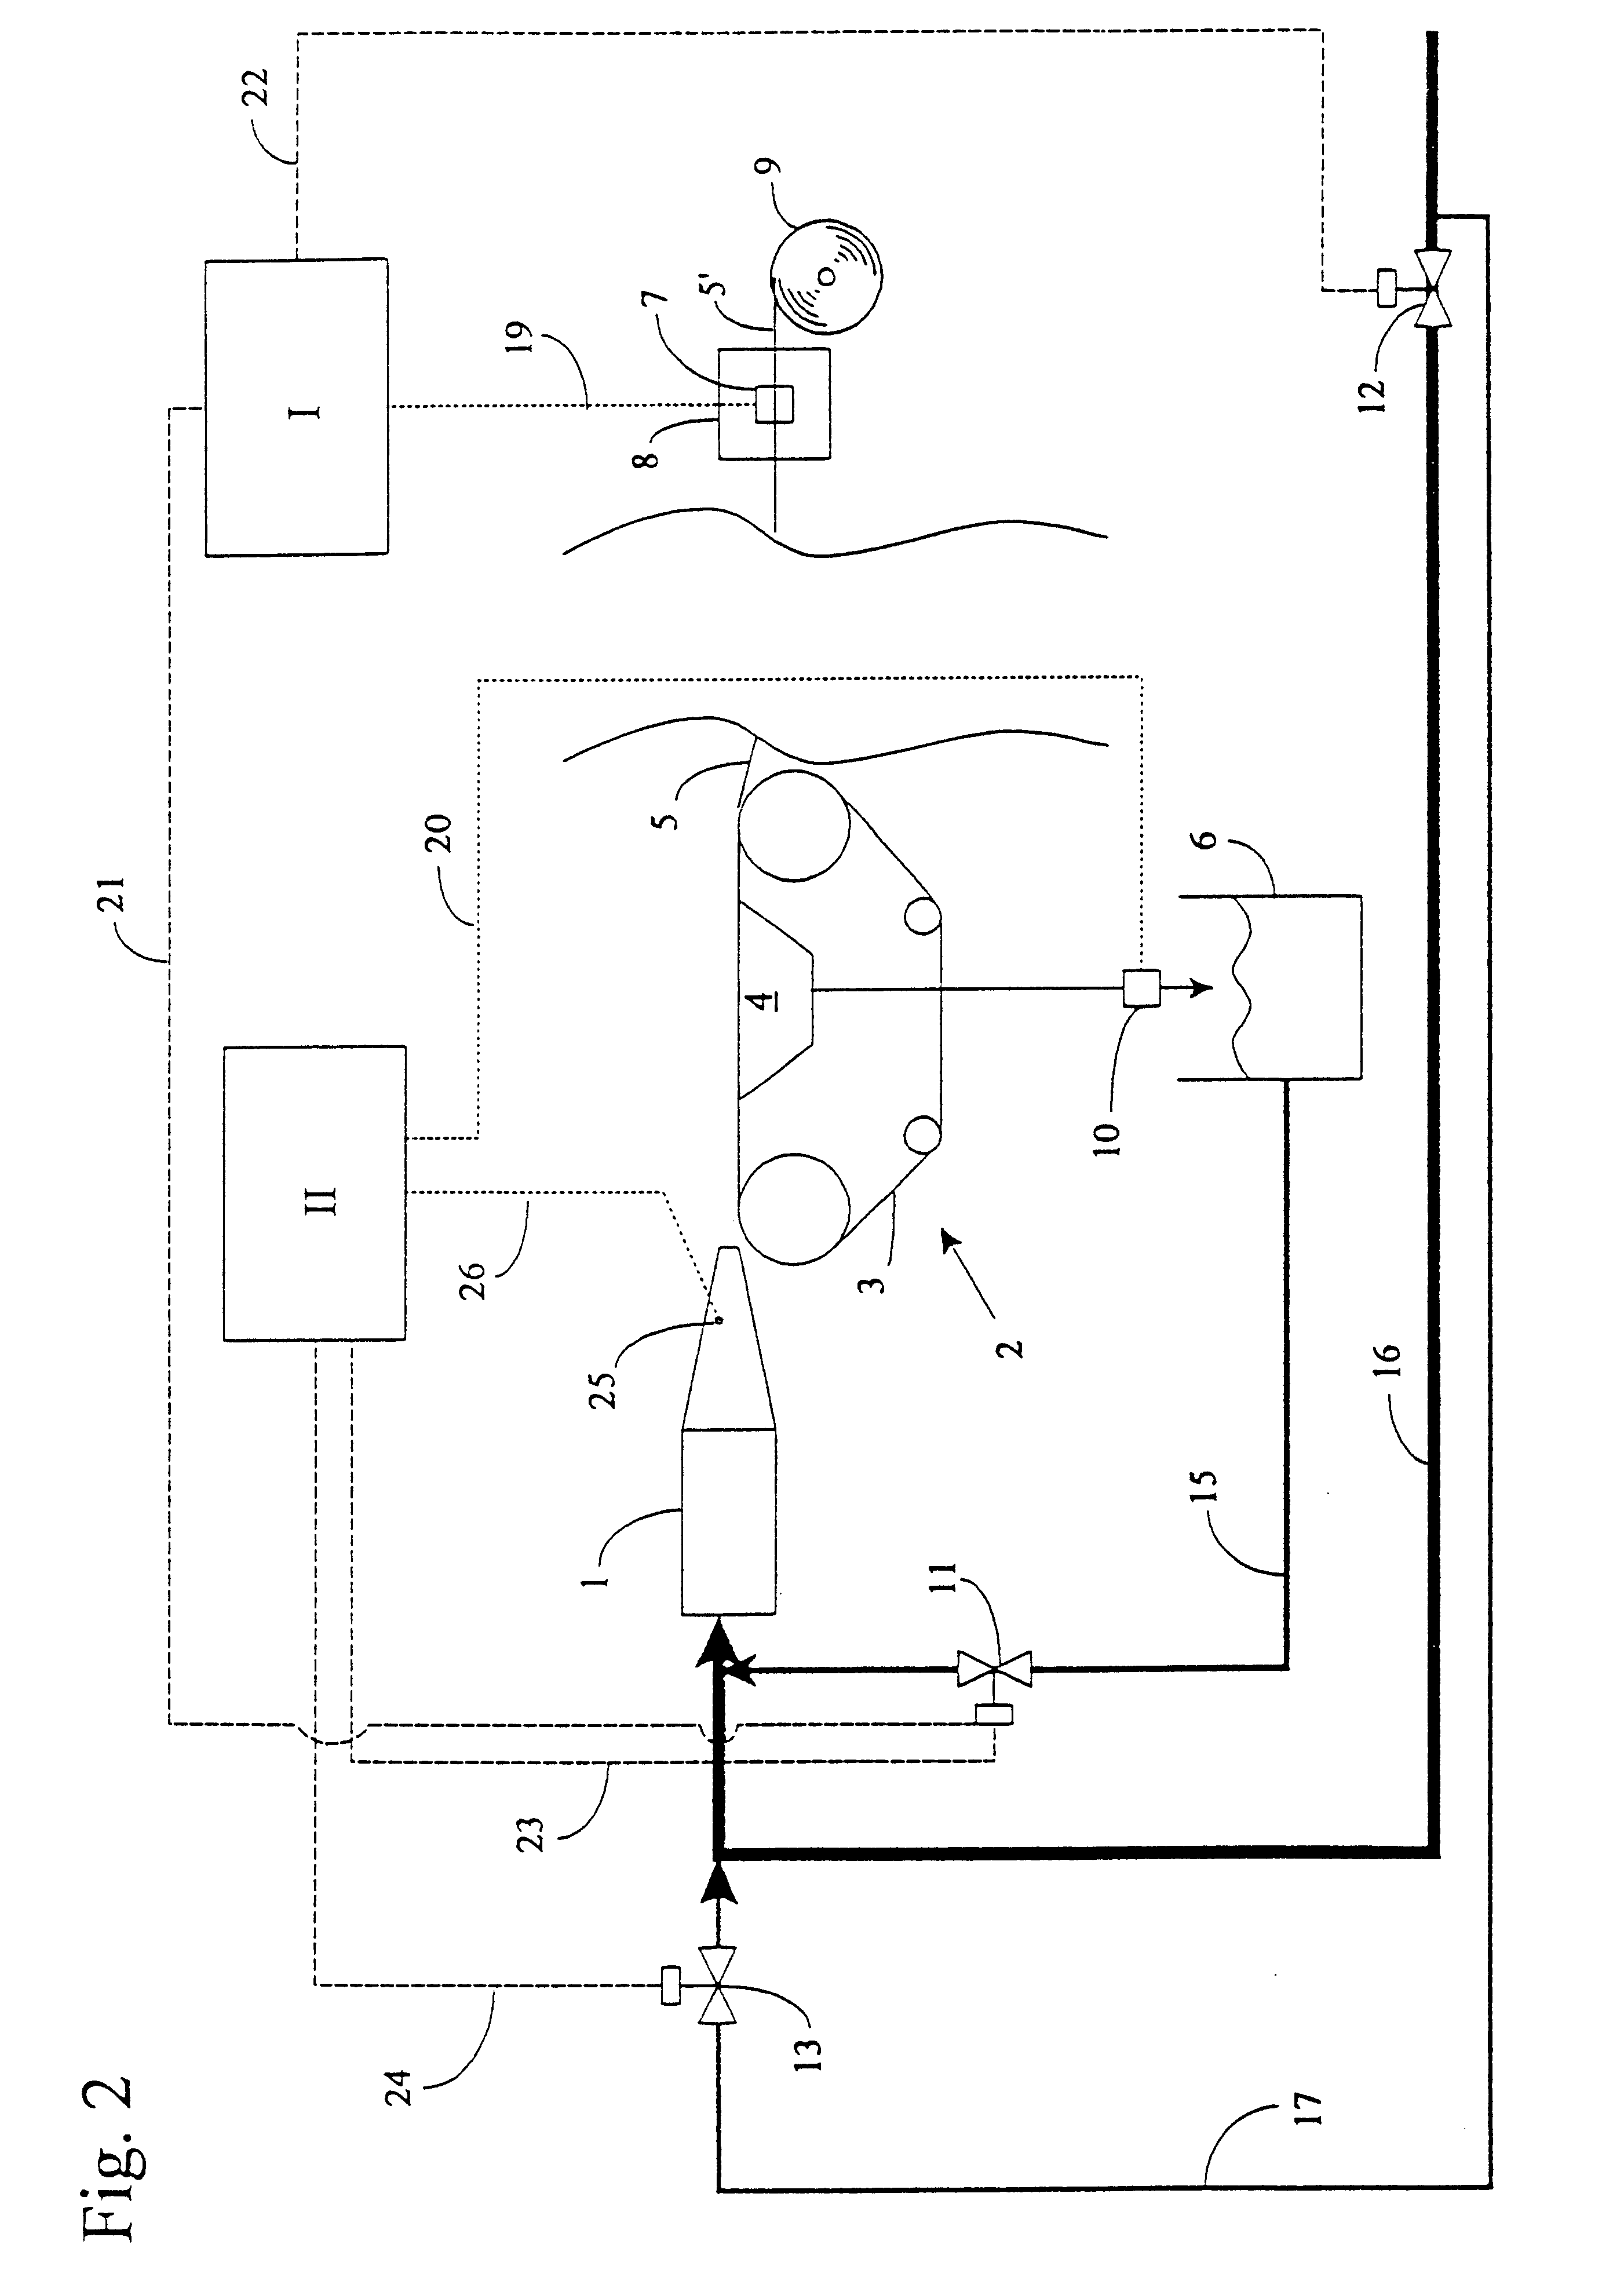 Process for controlling or regulating the basis weight of a paper or cardboard web